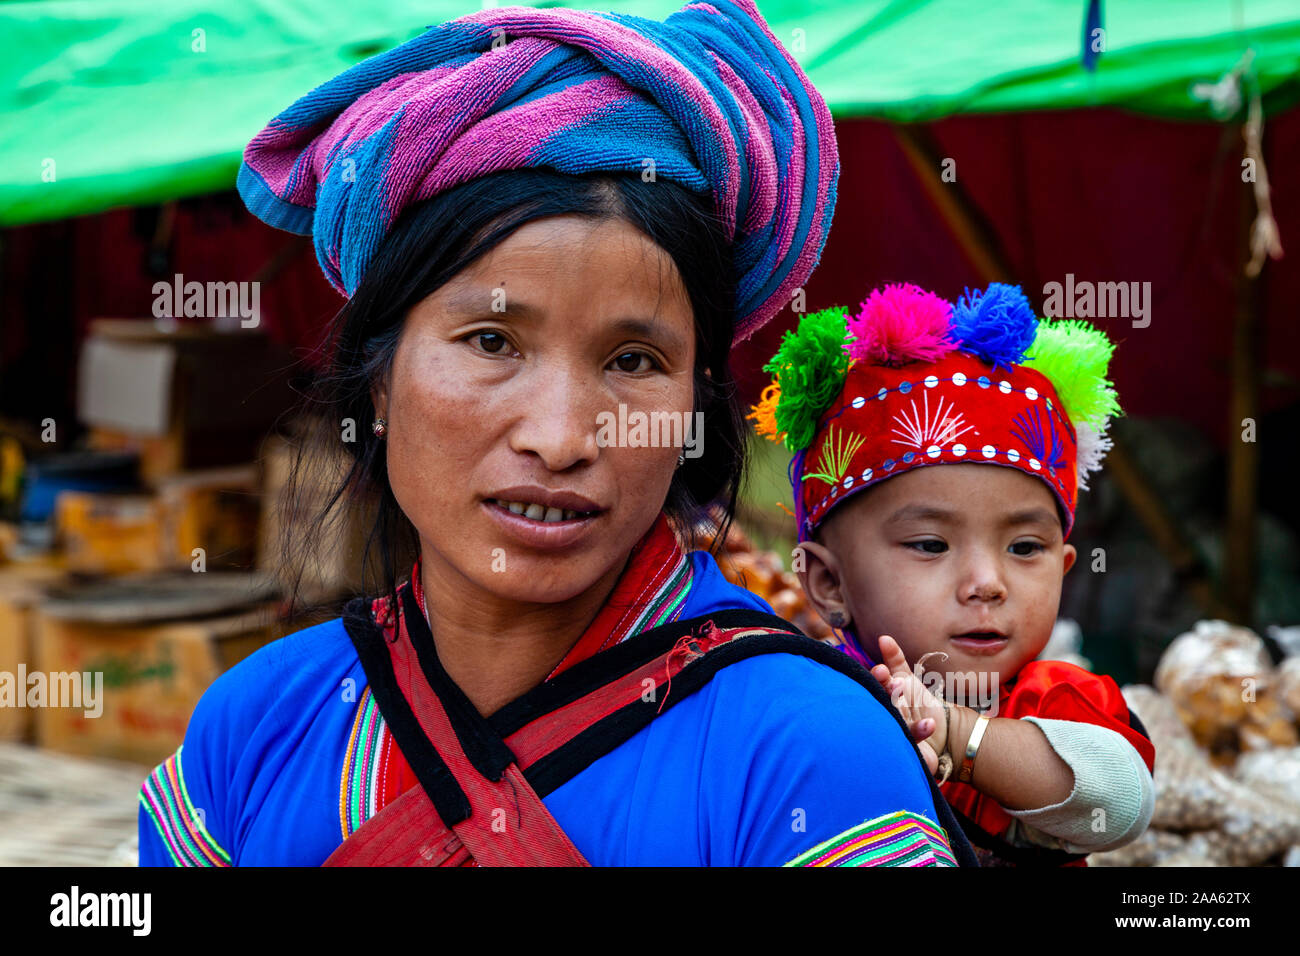 A Shan Ethnic Minority Mother and Baby, Pindaya, Shan State, Myanmar. Stock Photo